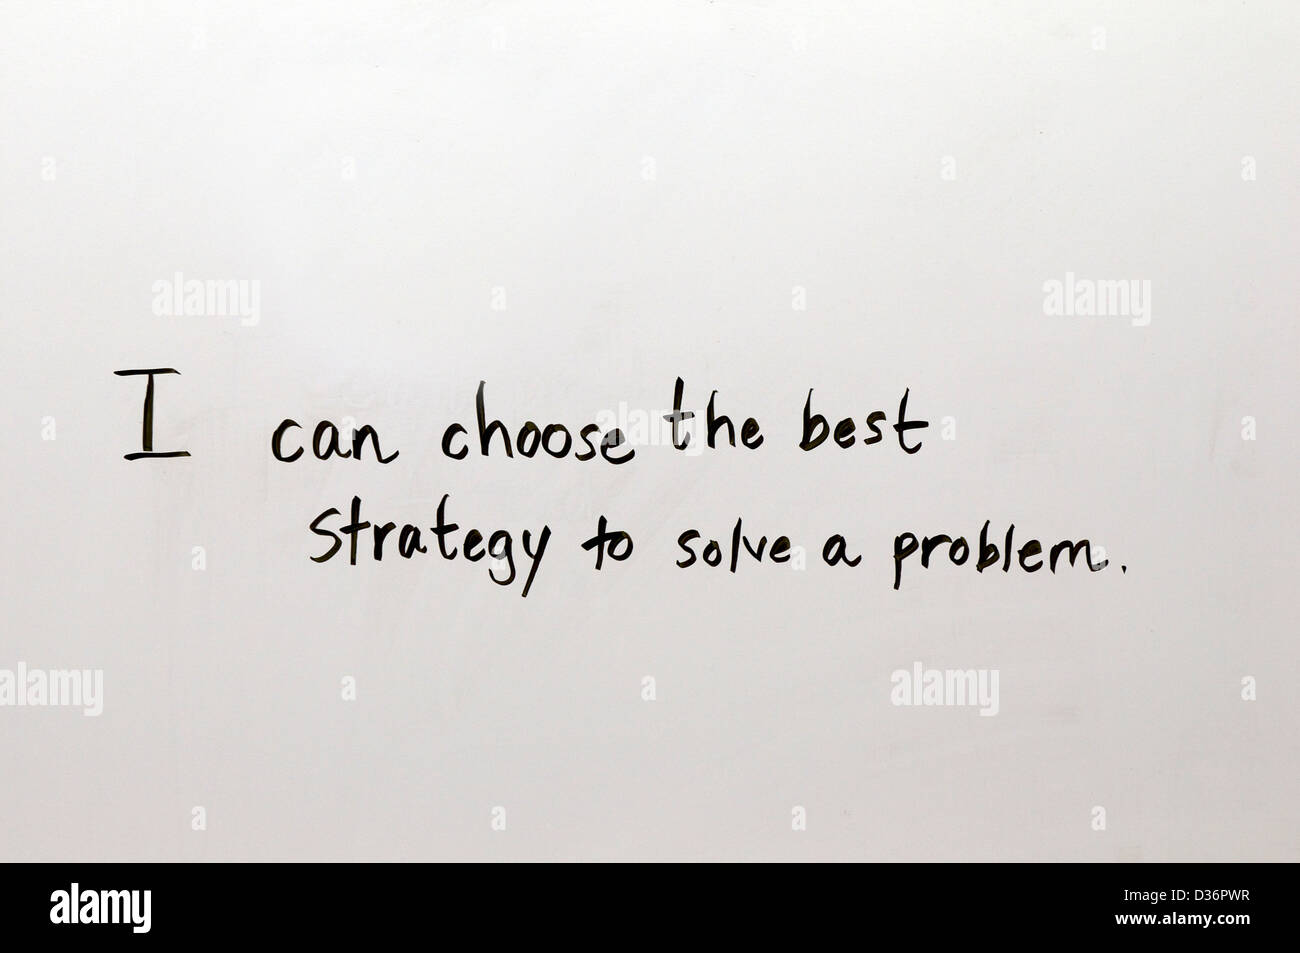 Lesson for school or work application written by hand in good penmanship on a white board: I can choose the best strategy to solve a problem. Stock Photo